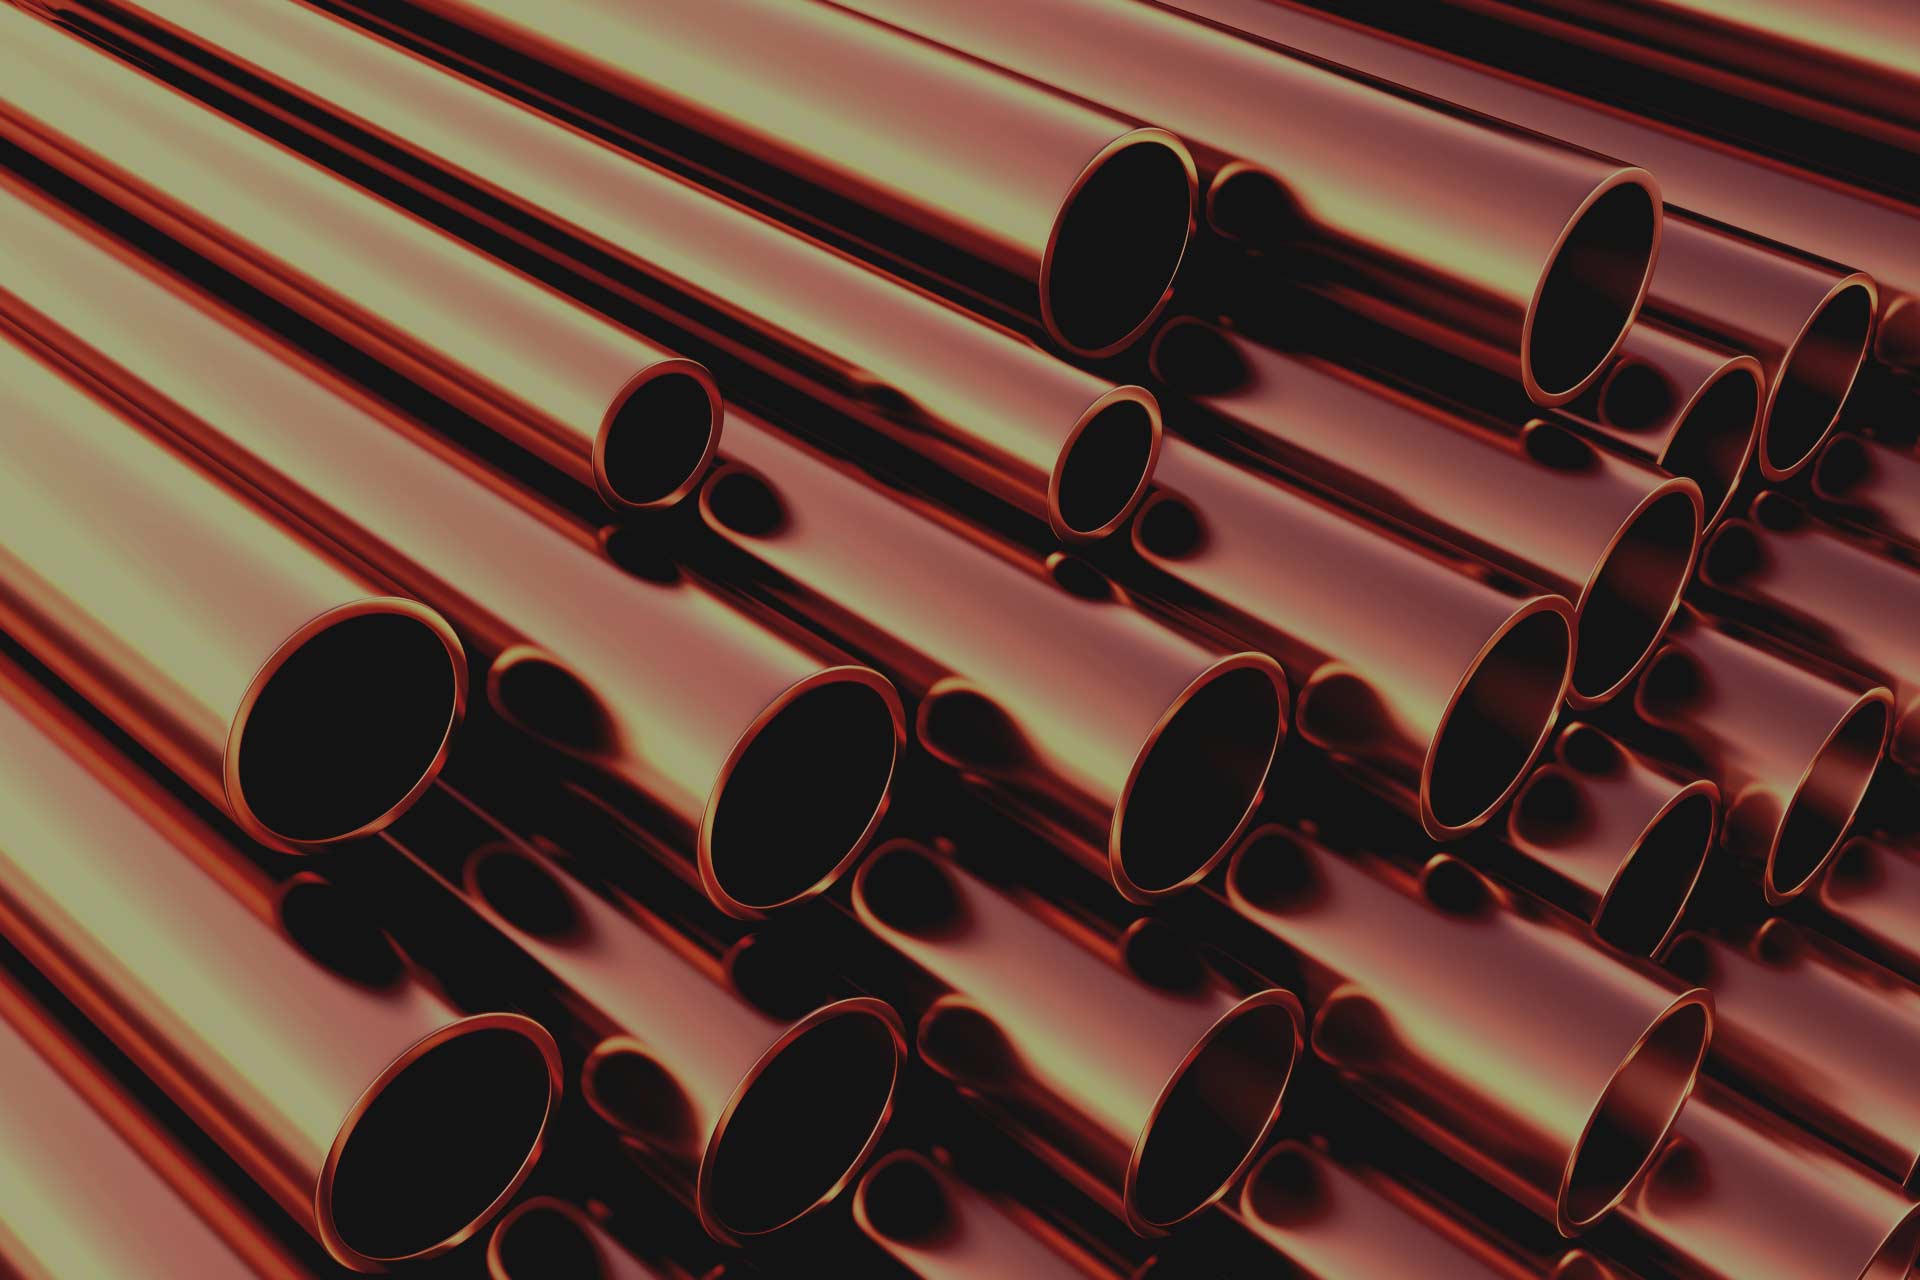 Copper points to more market weakness ahead